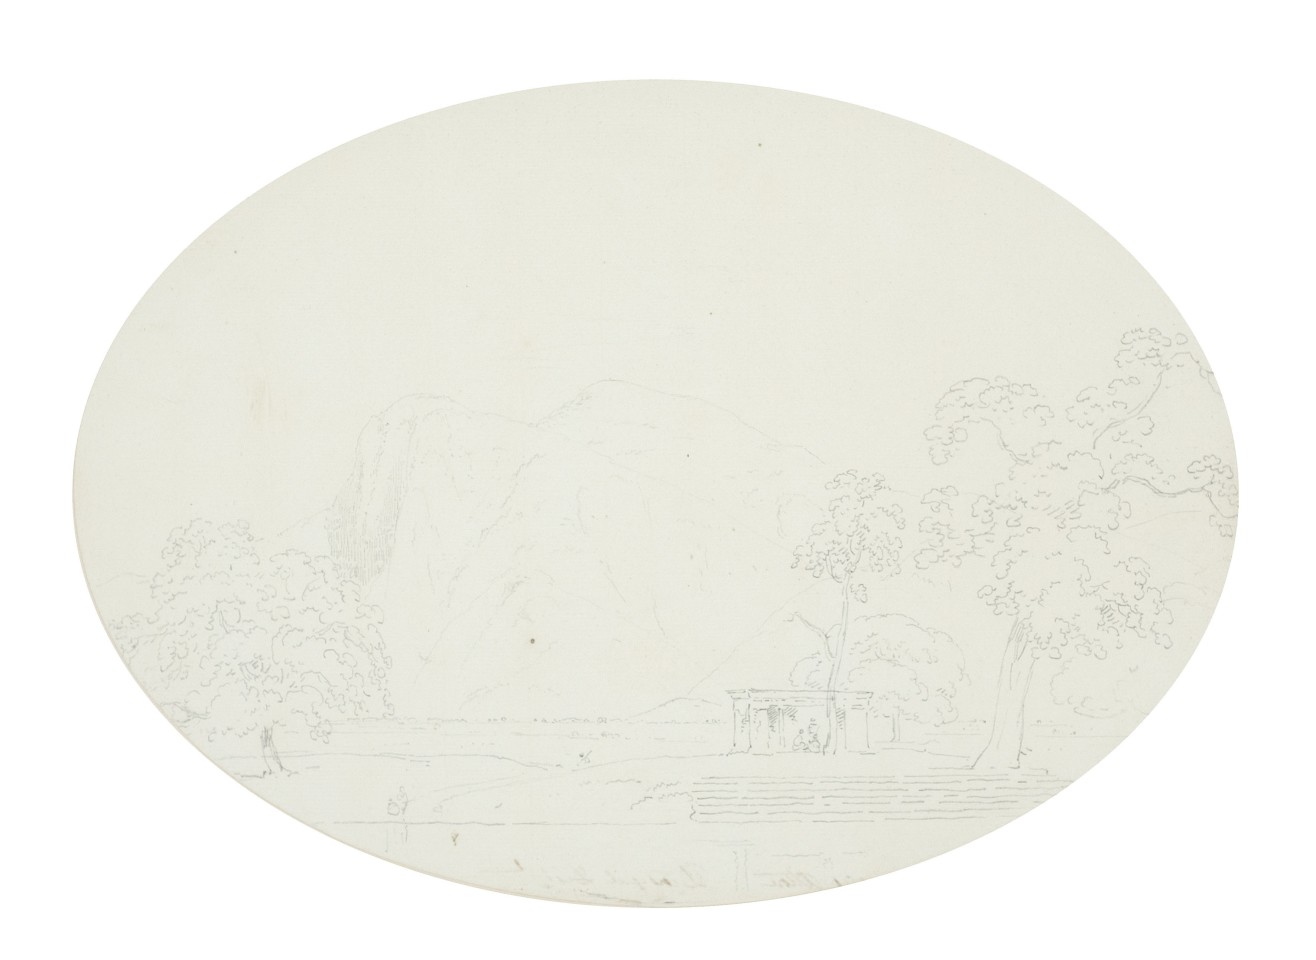 9. Thomas Daniell, R.A. (1749 – 1840) and William Daniell, R.A. (1769 – 1837), View of India , c. 1790